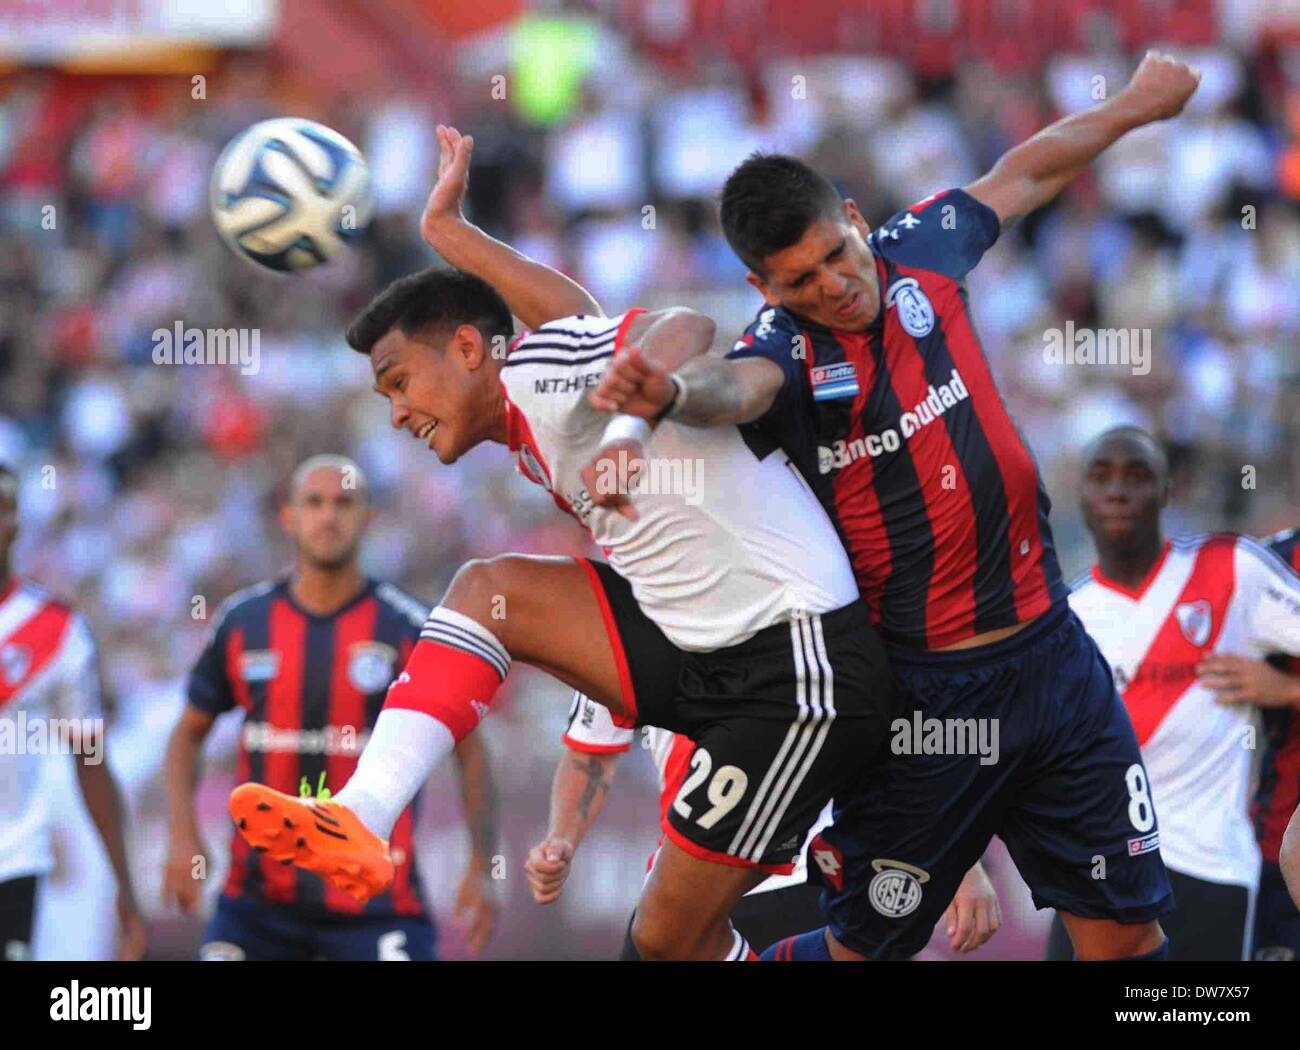 Buenos Aires, Argentina. 2nd Mar, 2014. Teofilo Gutierrez (L) of River Plate vies for the ball with Enzo Kalinski (R) of San Lorenzo during their match of the Final Tournament held at Monumental Stadium, in Buenos Aires, Argentina, on March 2, 2014. Credit:  Maximiliano Luna/TELAM/Xinhua/Alamy Live News Stock Photo